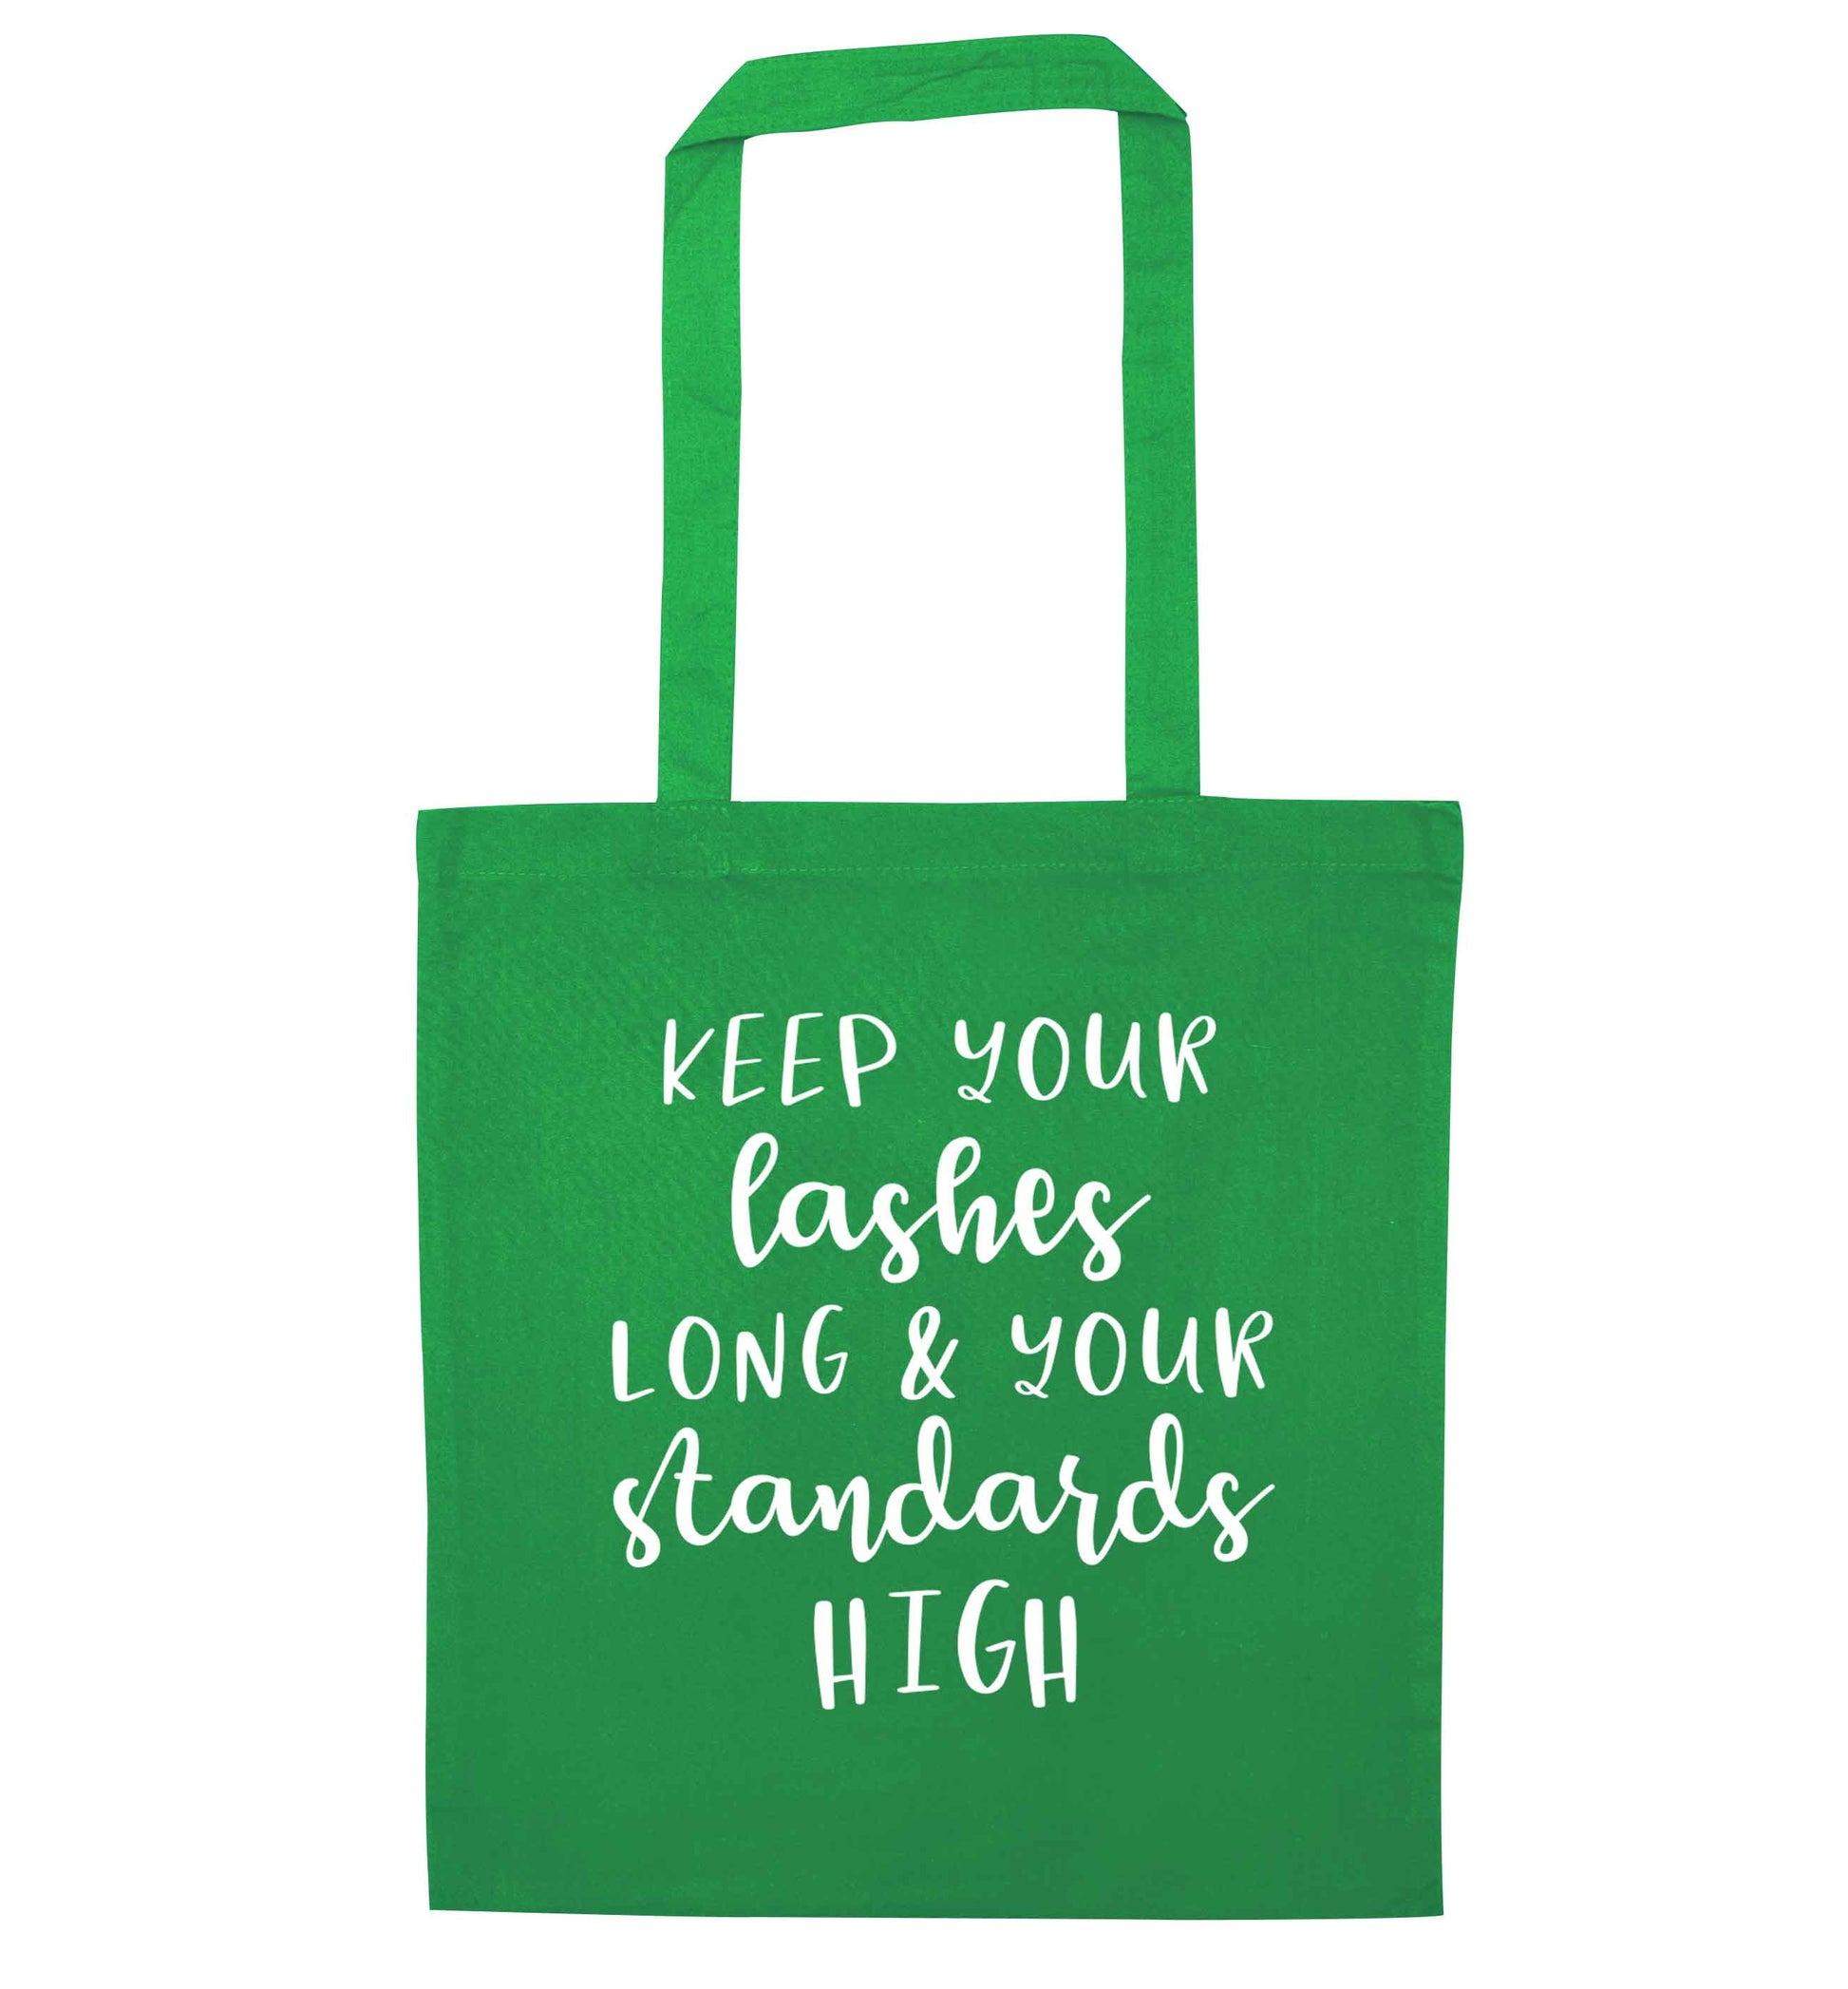 Keep your lashes long and your standards high green tote bag